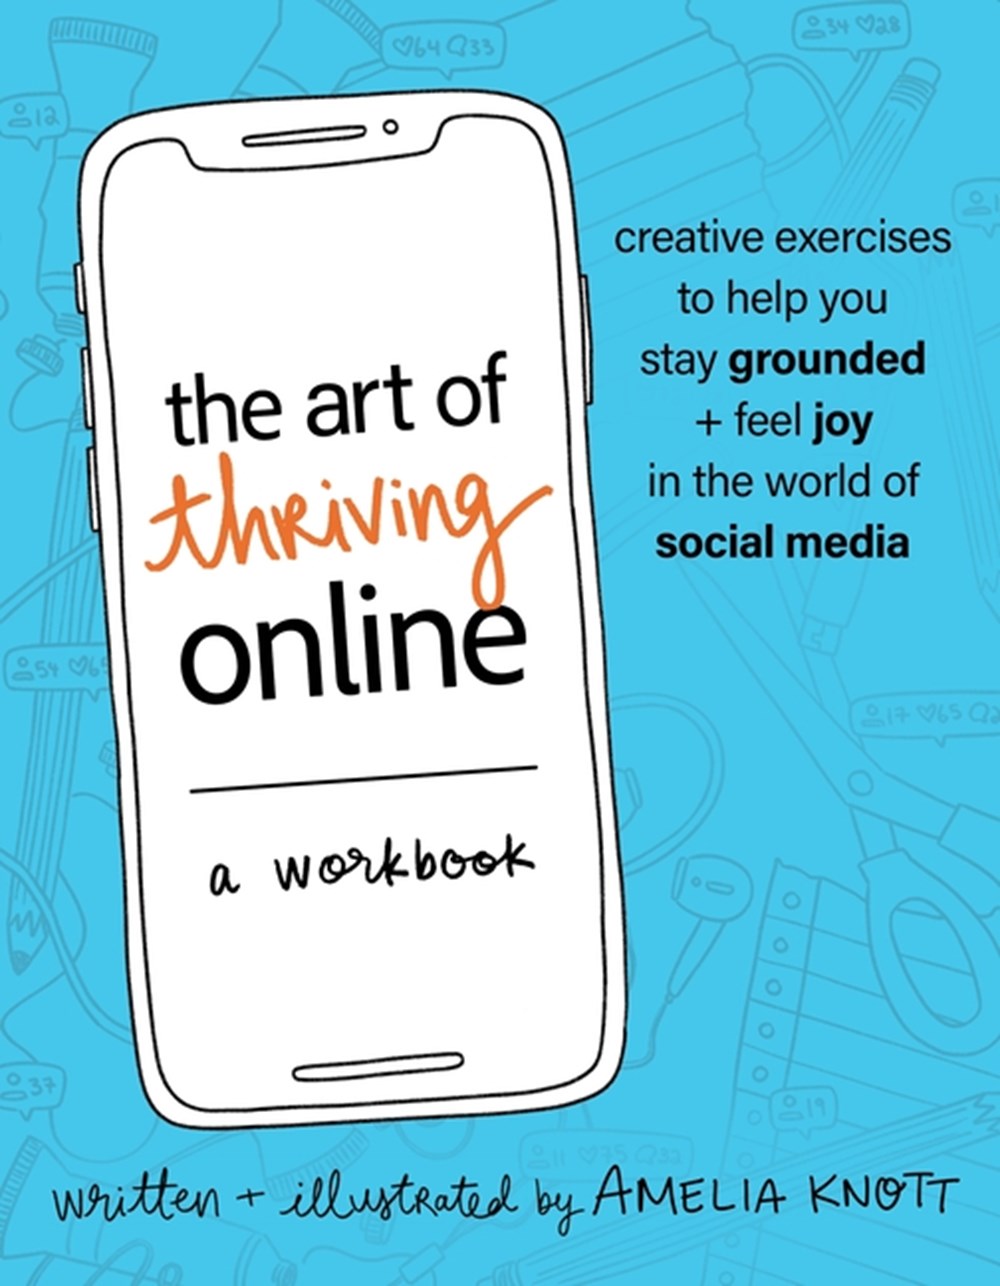 Art of Thriving Online: A Workbook: Creative Exercises to Help You Stay Grounded and Feel Joy in the